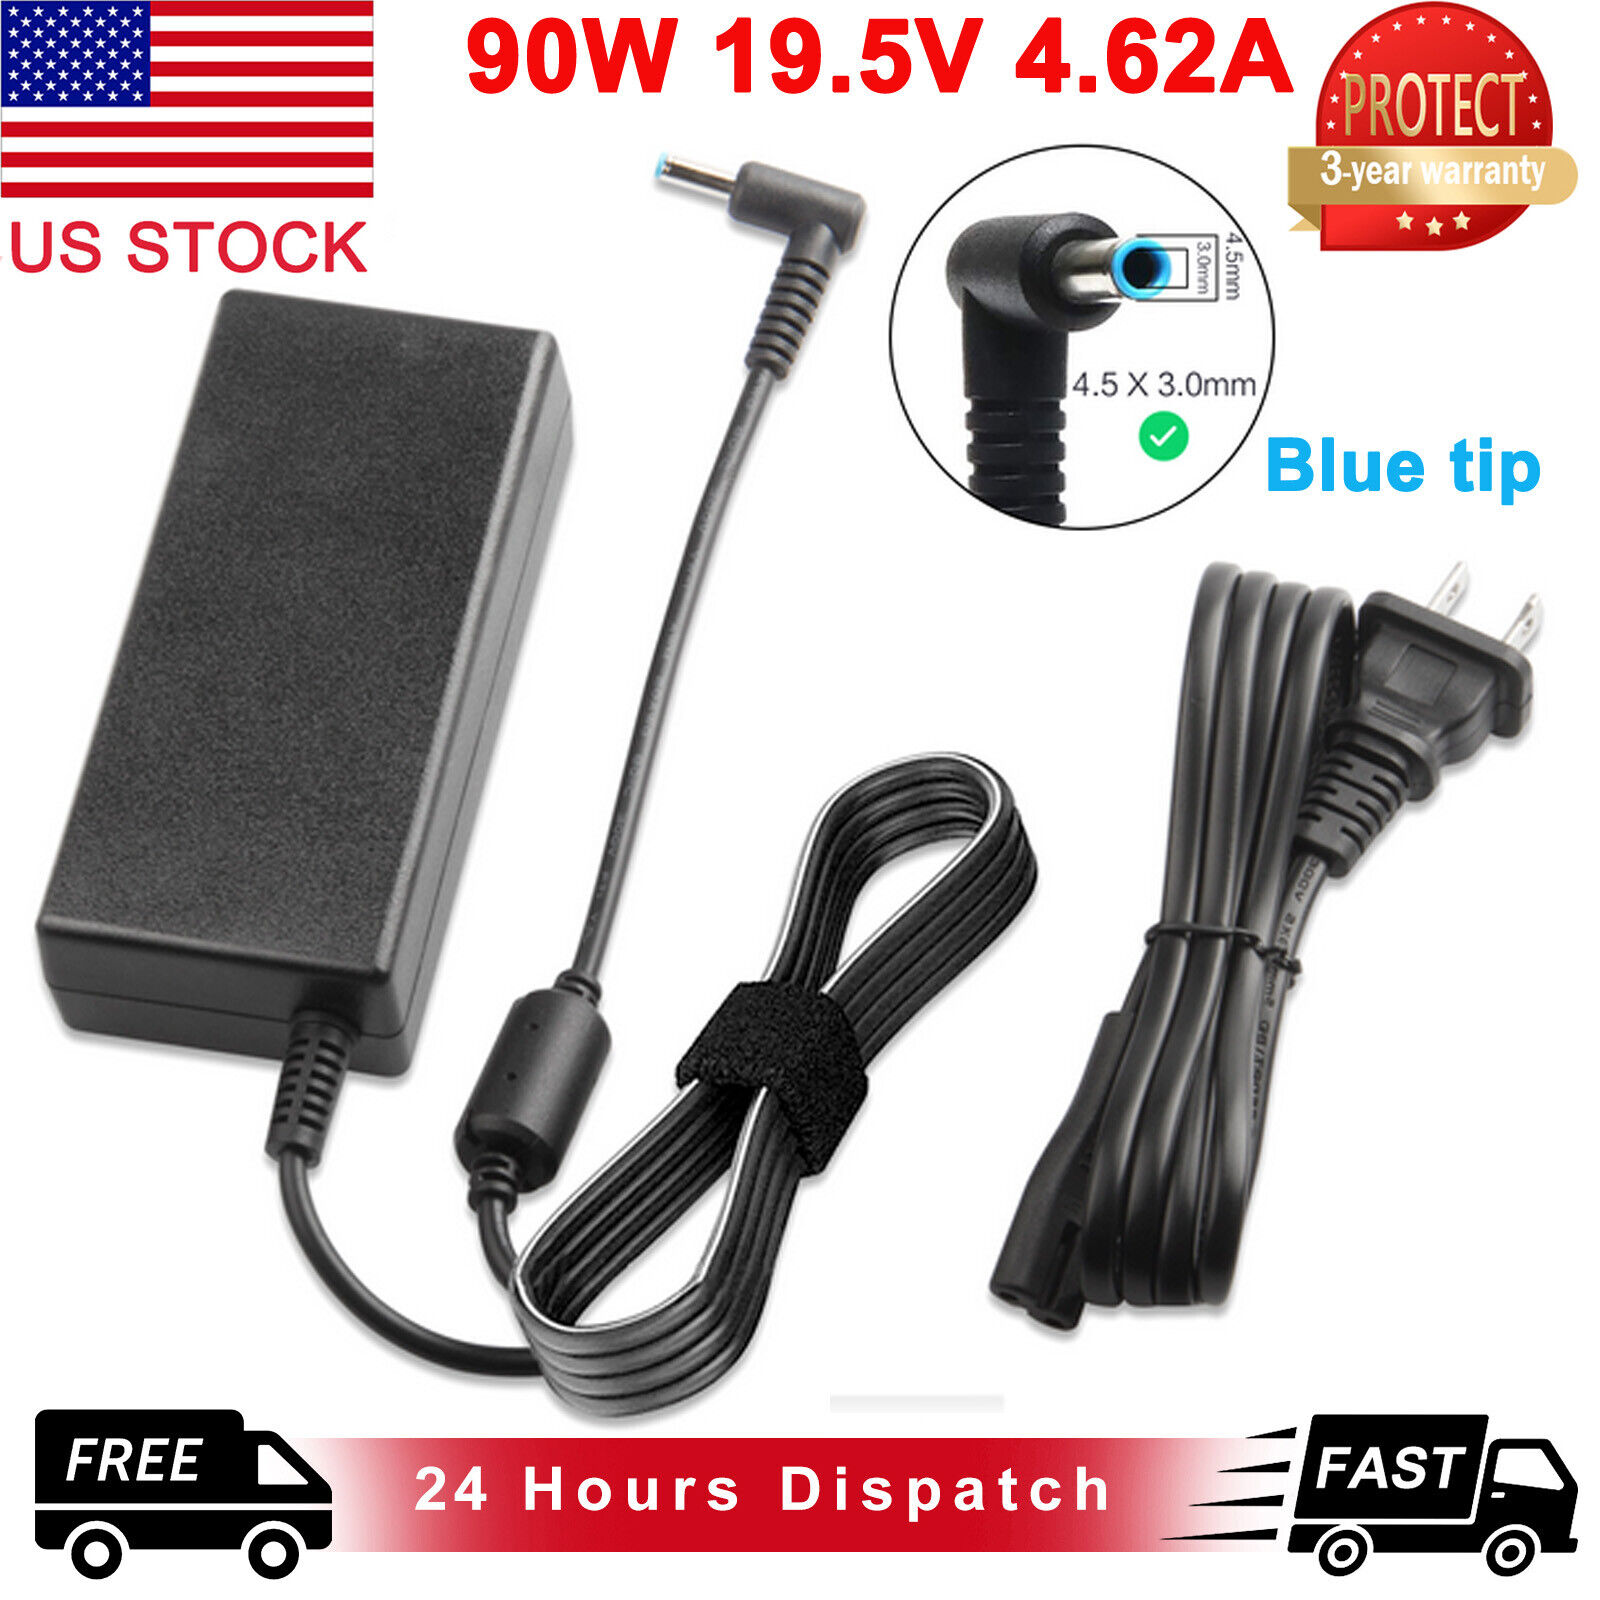 SK90B195462 Replacement AC Adapter Power for HP 19.5V 4.62A 90W Various Model US